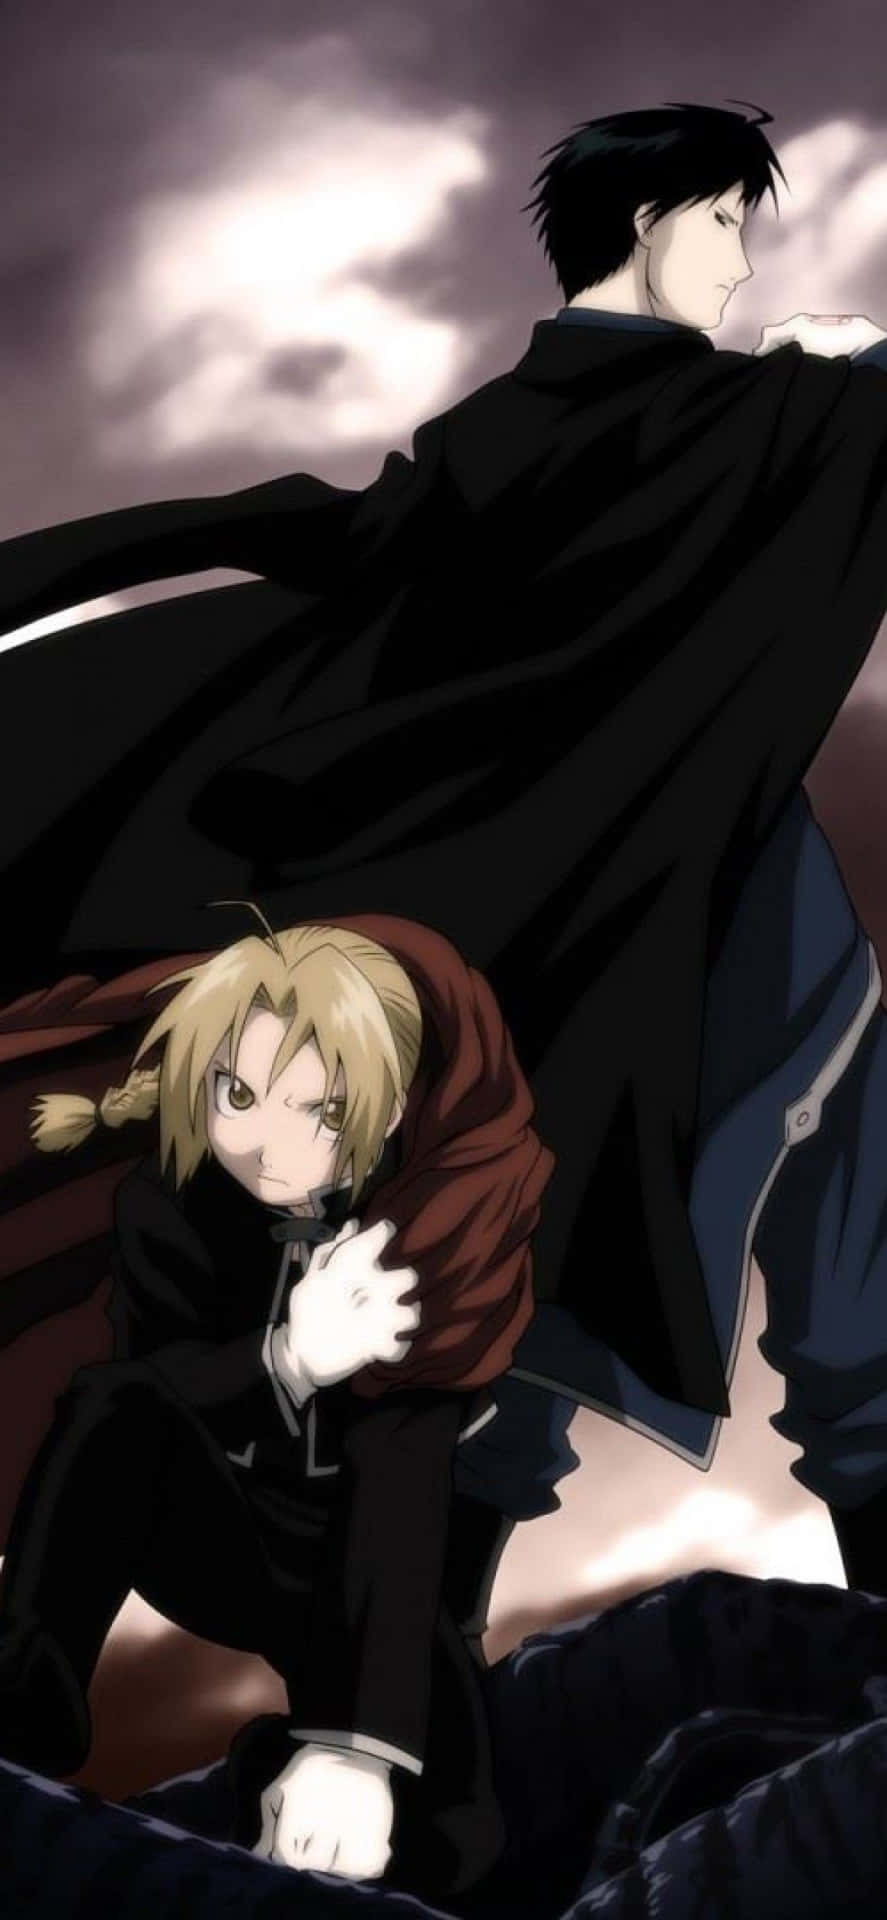 Edward Elric Displaying His Alchemy Prowess In Action